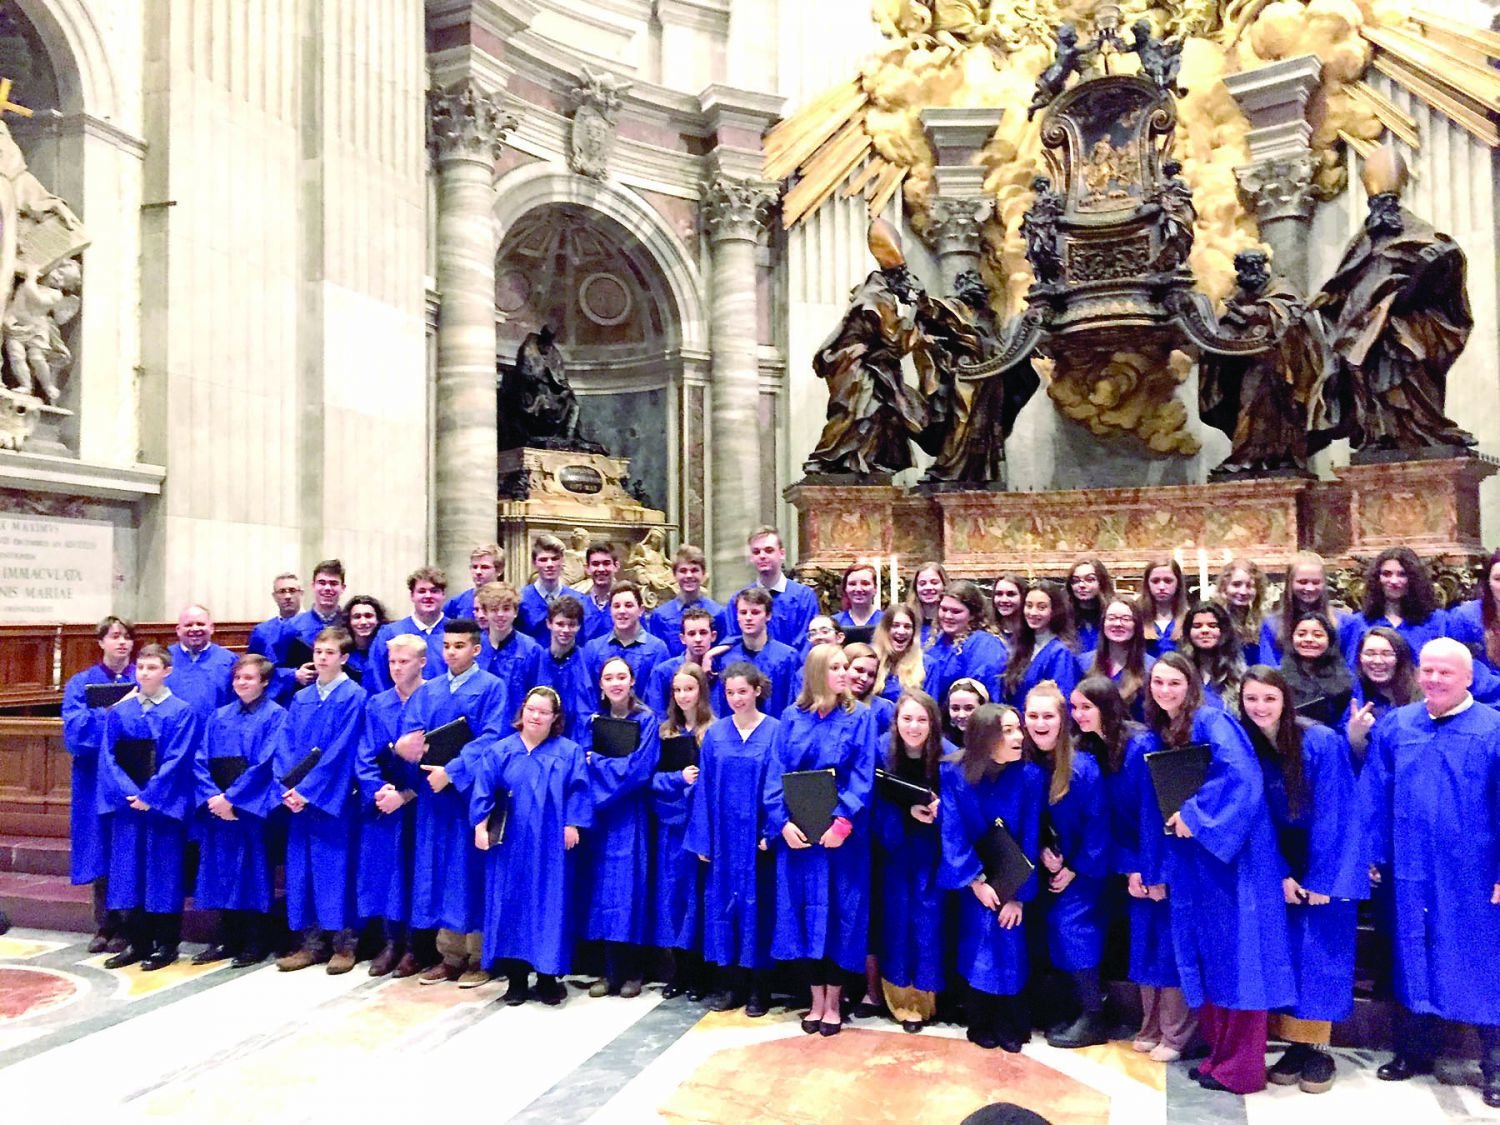 The New Hope-Solebury choirs sing while abroad in Italy.